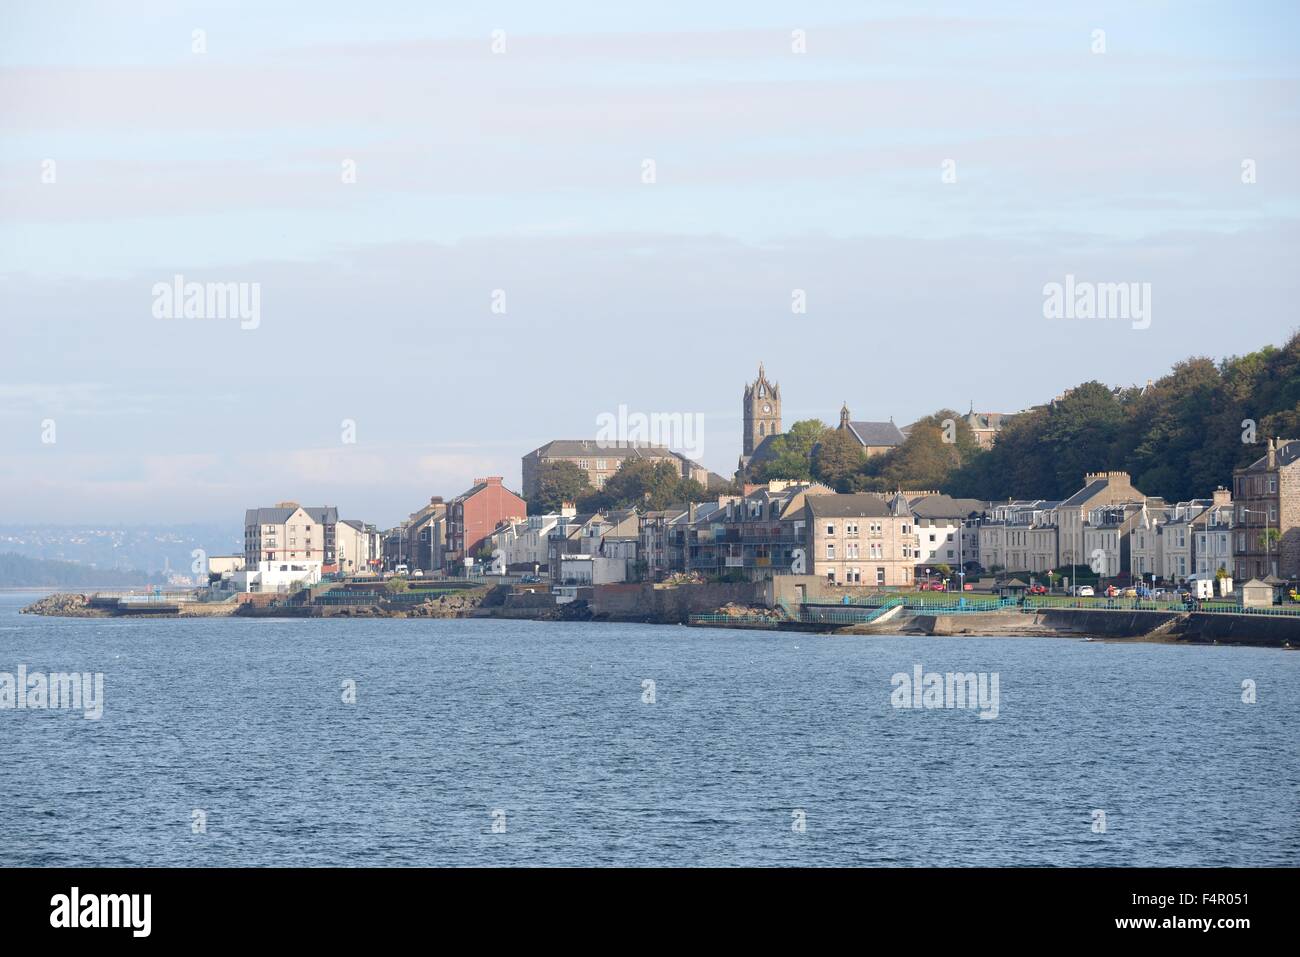 The town of Gourock which lies on the west coast of Scotland on the river Clyde estuary. Stock Photo